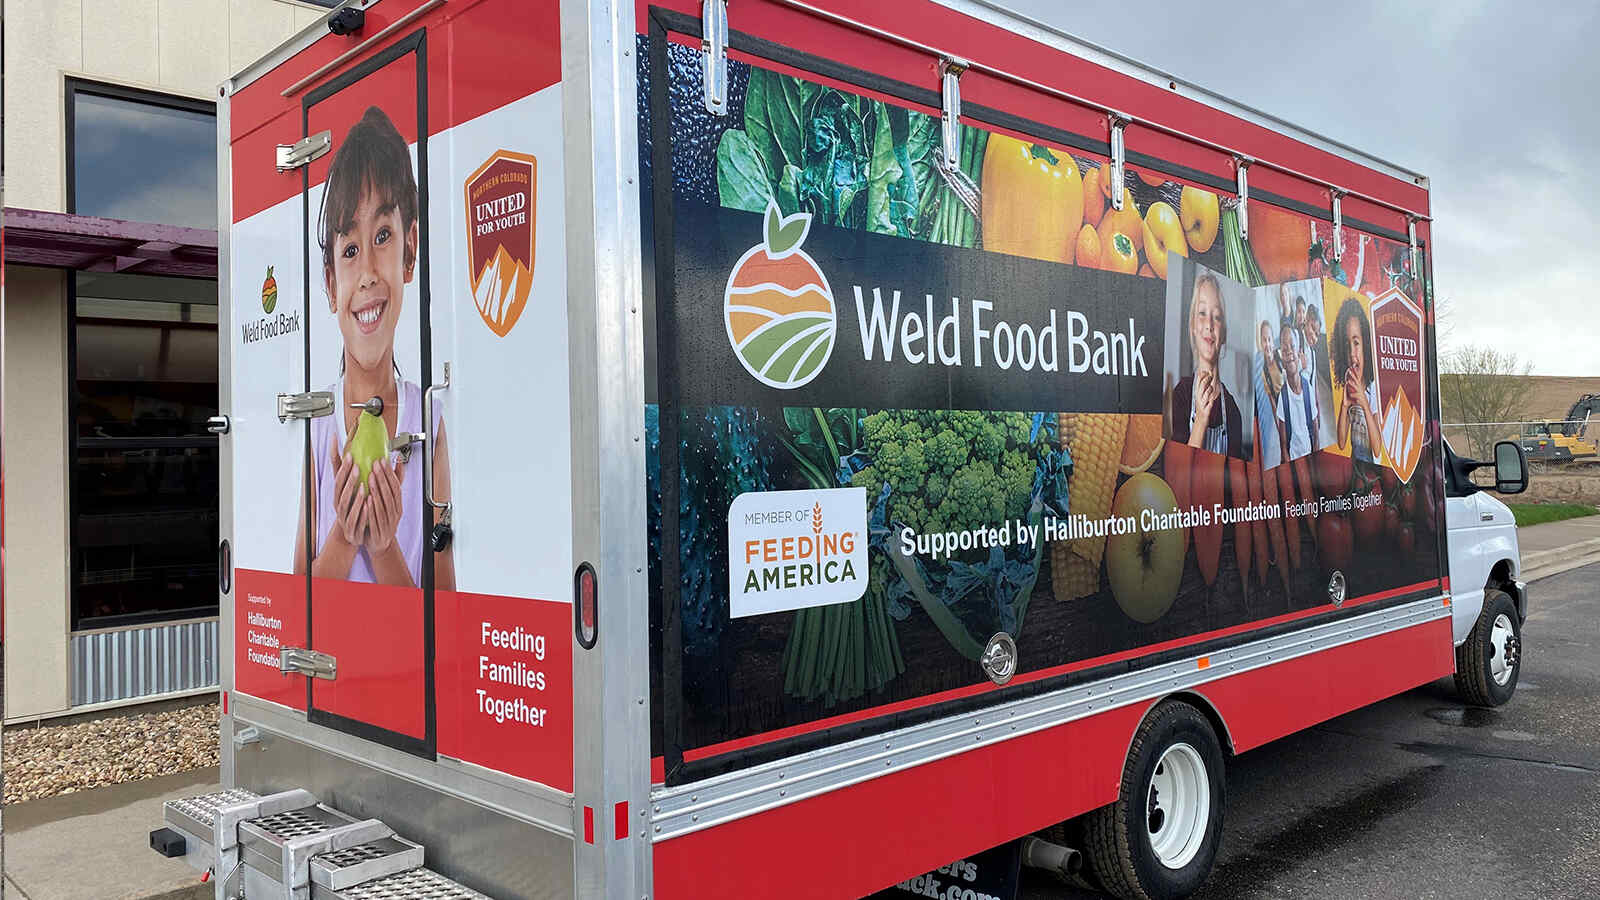 Halliburton collects food and donations for the Weld Food Bank.